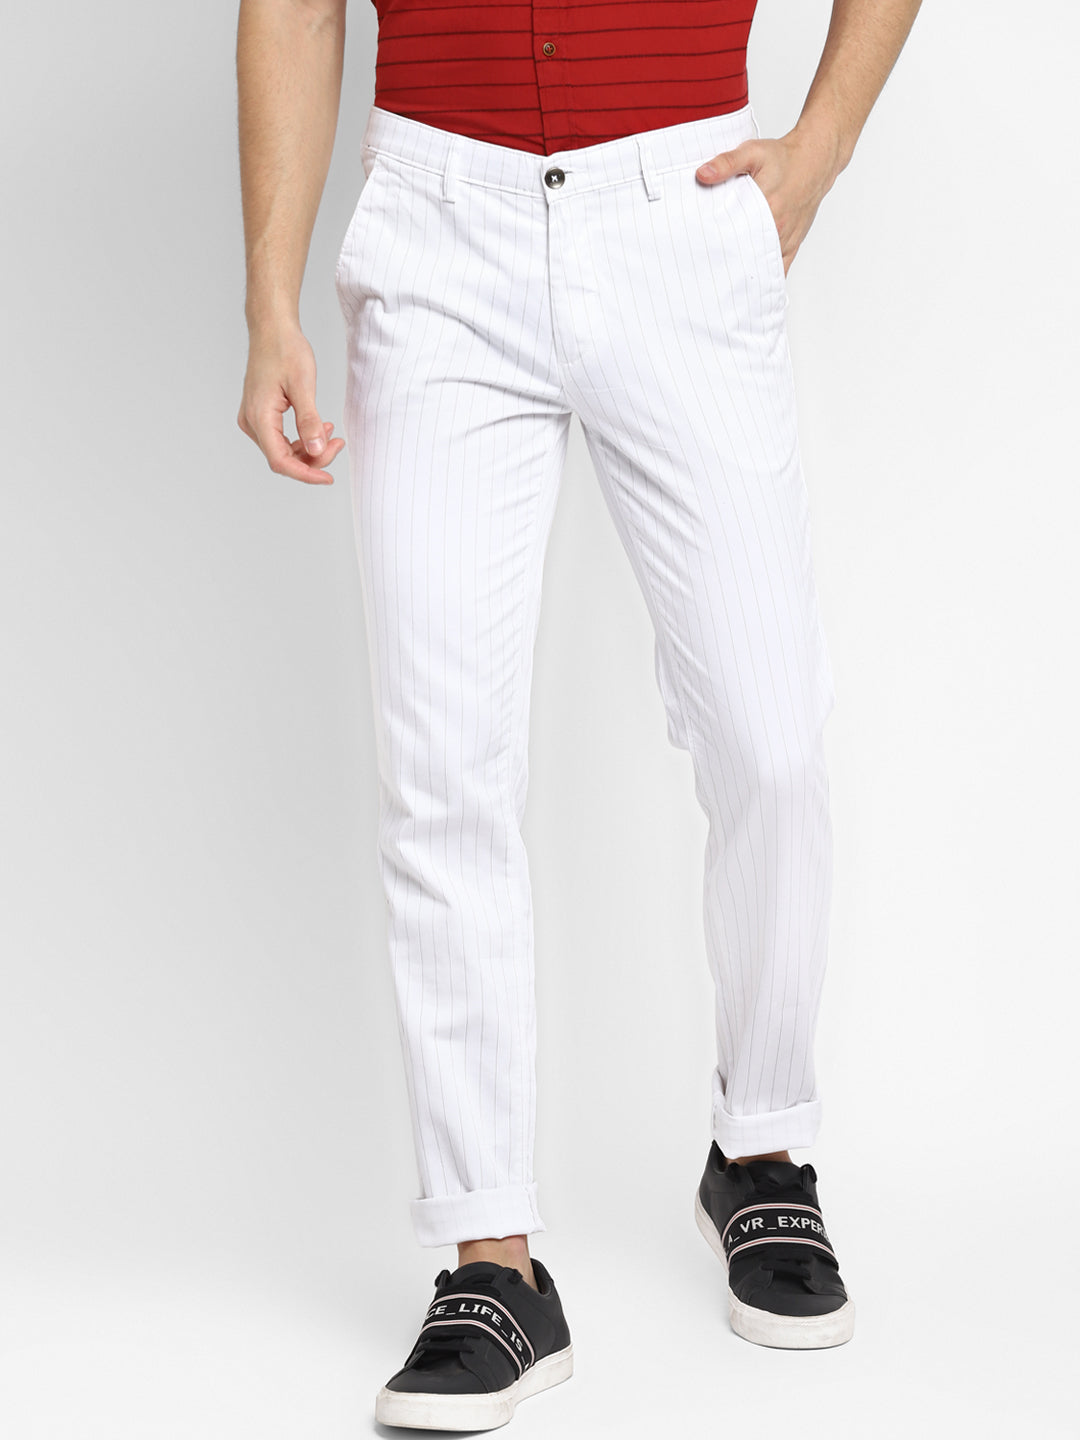 Cotton Stretch White Striped Narrow Fit Flat Front Casual Trouser